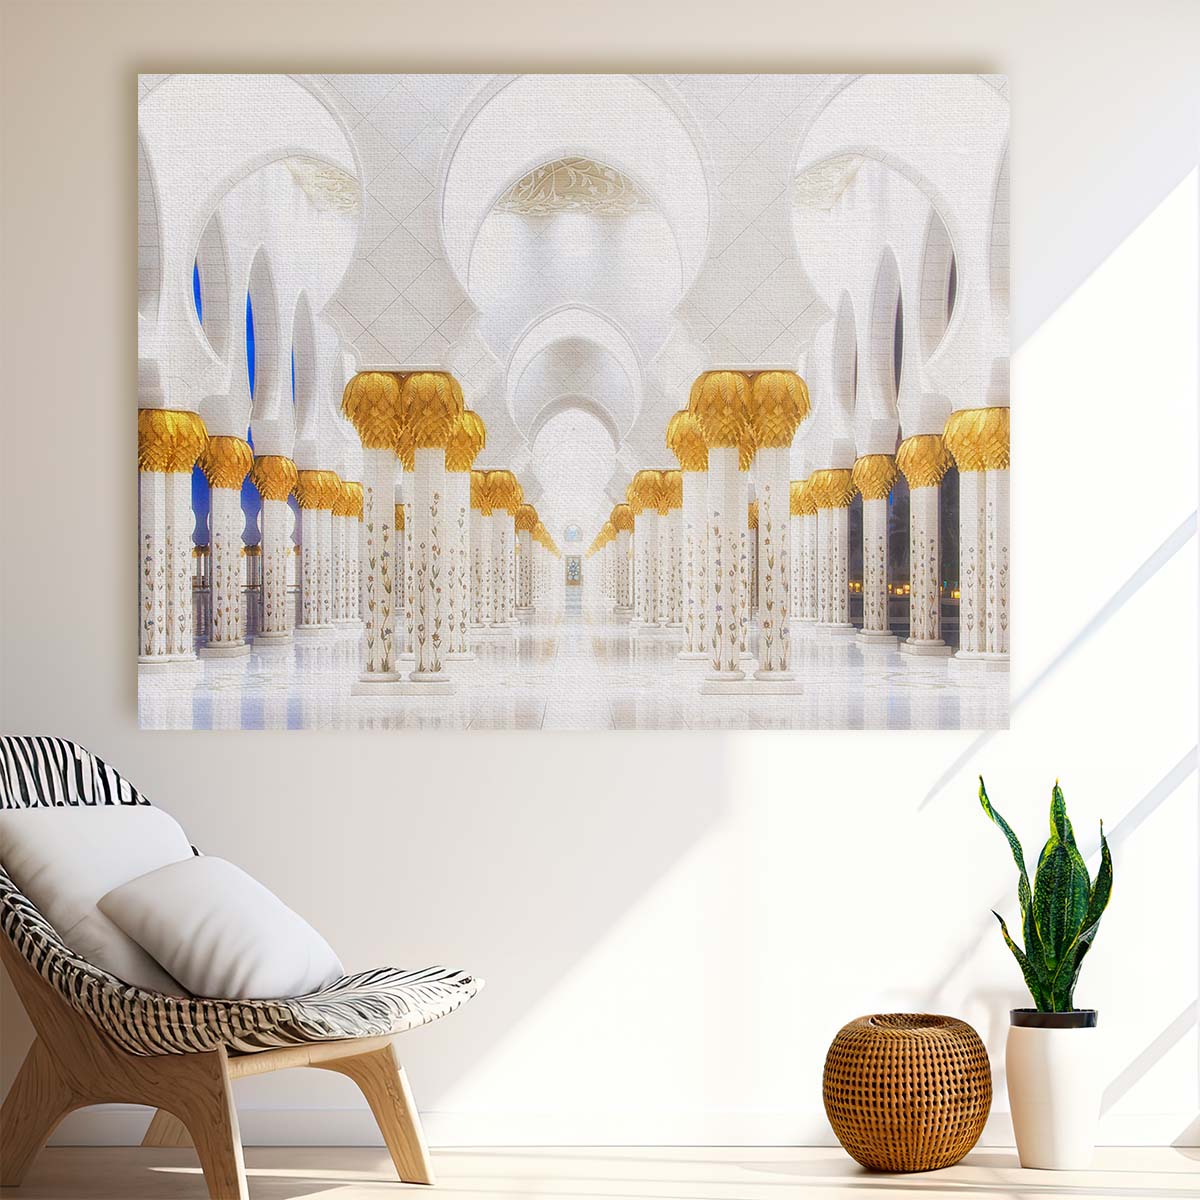 Majestic Sheikh Zayed Mosque Gold & White Wall Art by Luxuriance Designs. Made in USA.